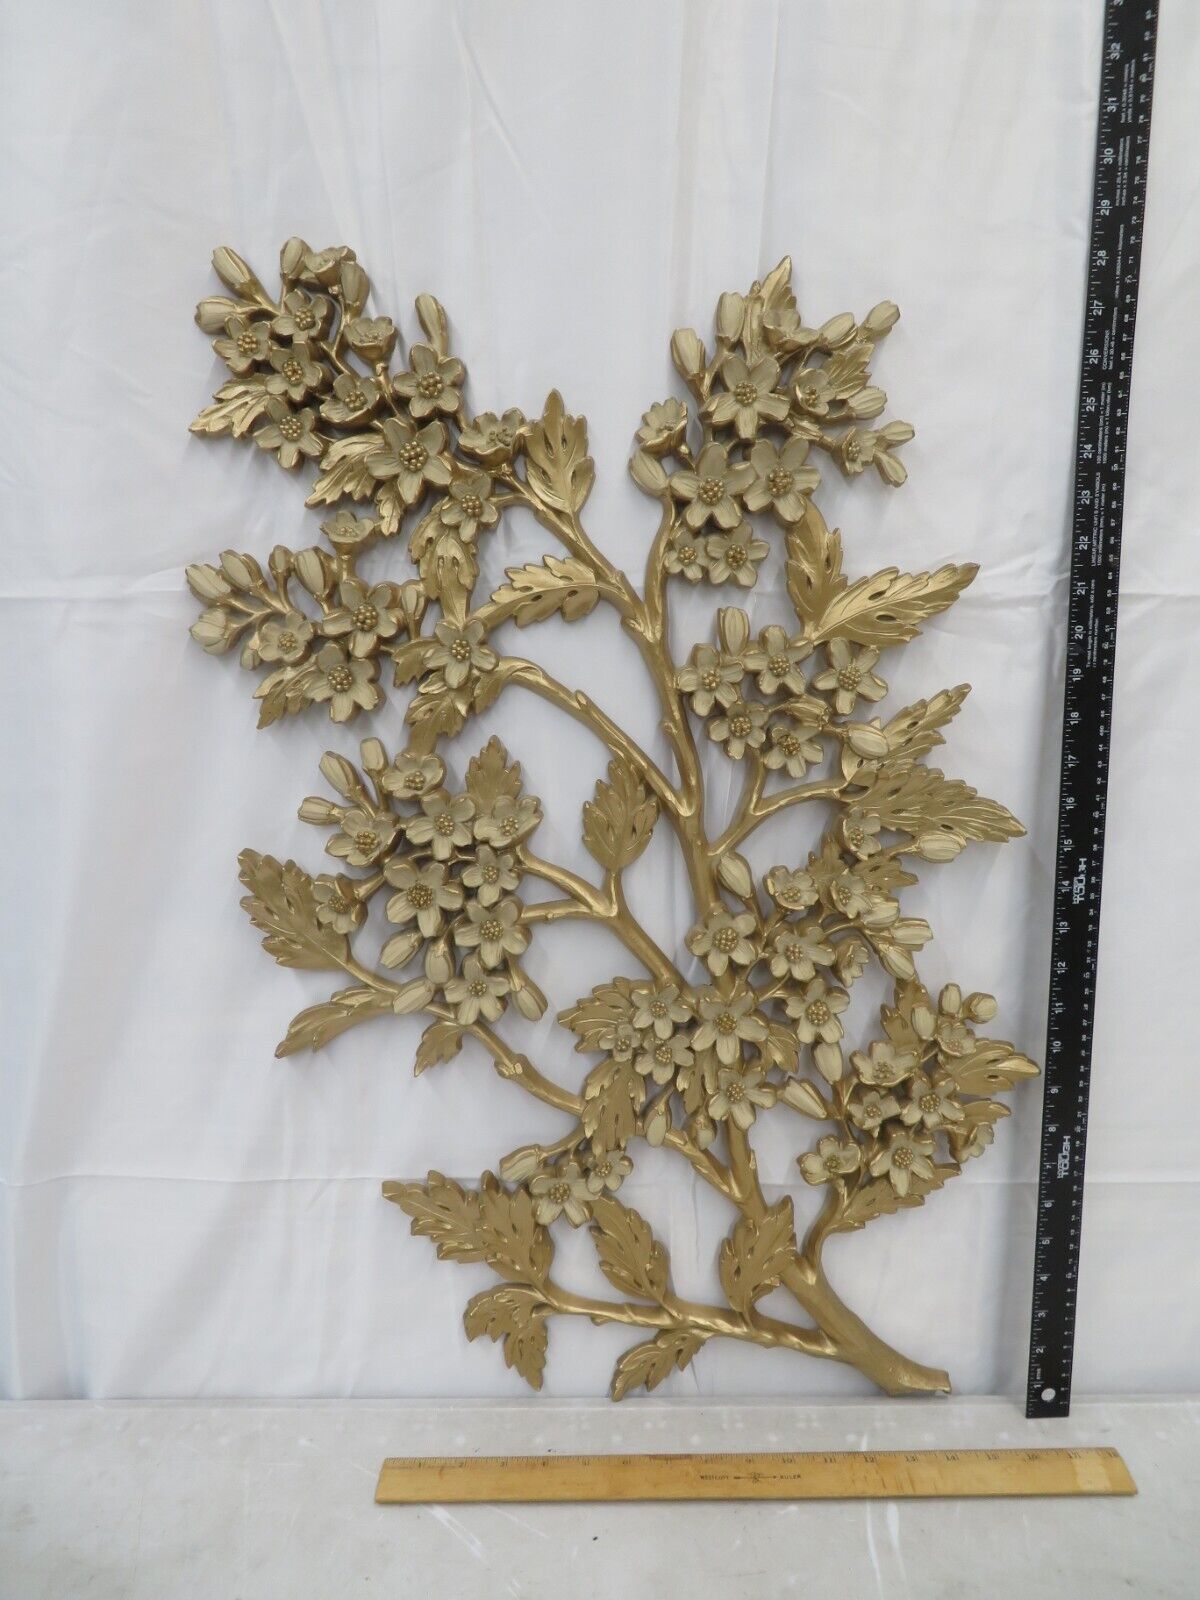 VINTAGE 33” SYROCO LARGE DOGWOOD FLOWERS BRANCH WALL  ART SCULPTURE 7031 MCM 